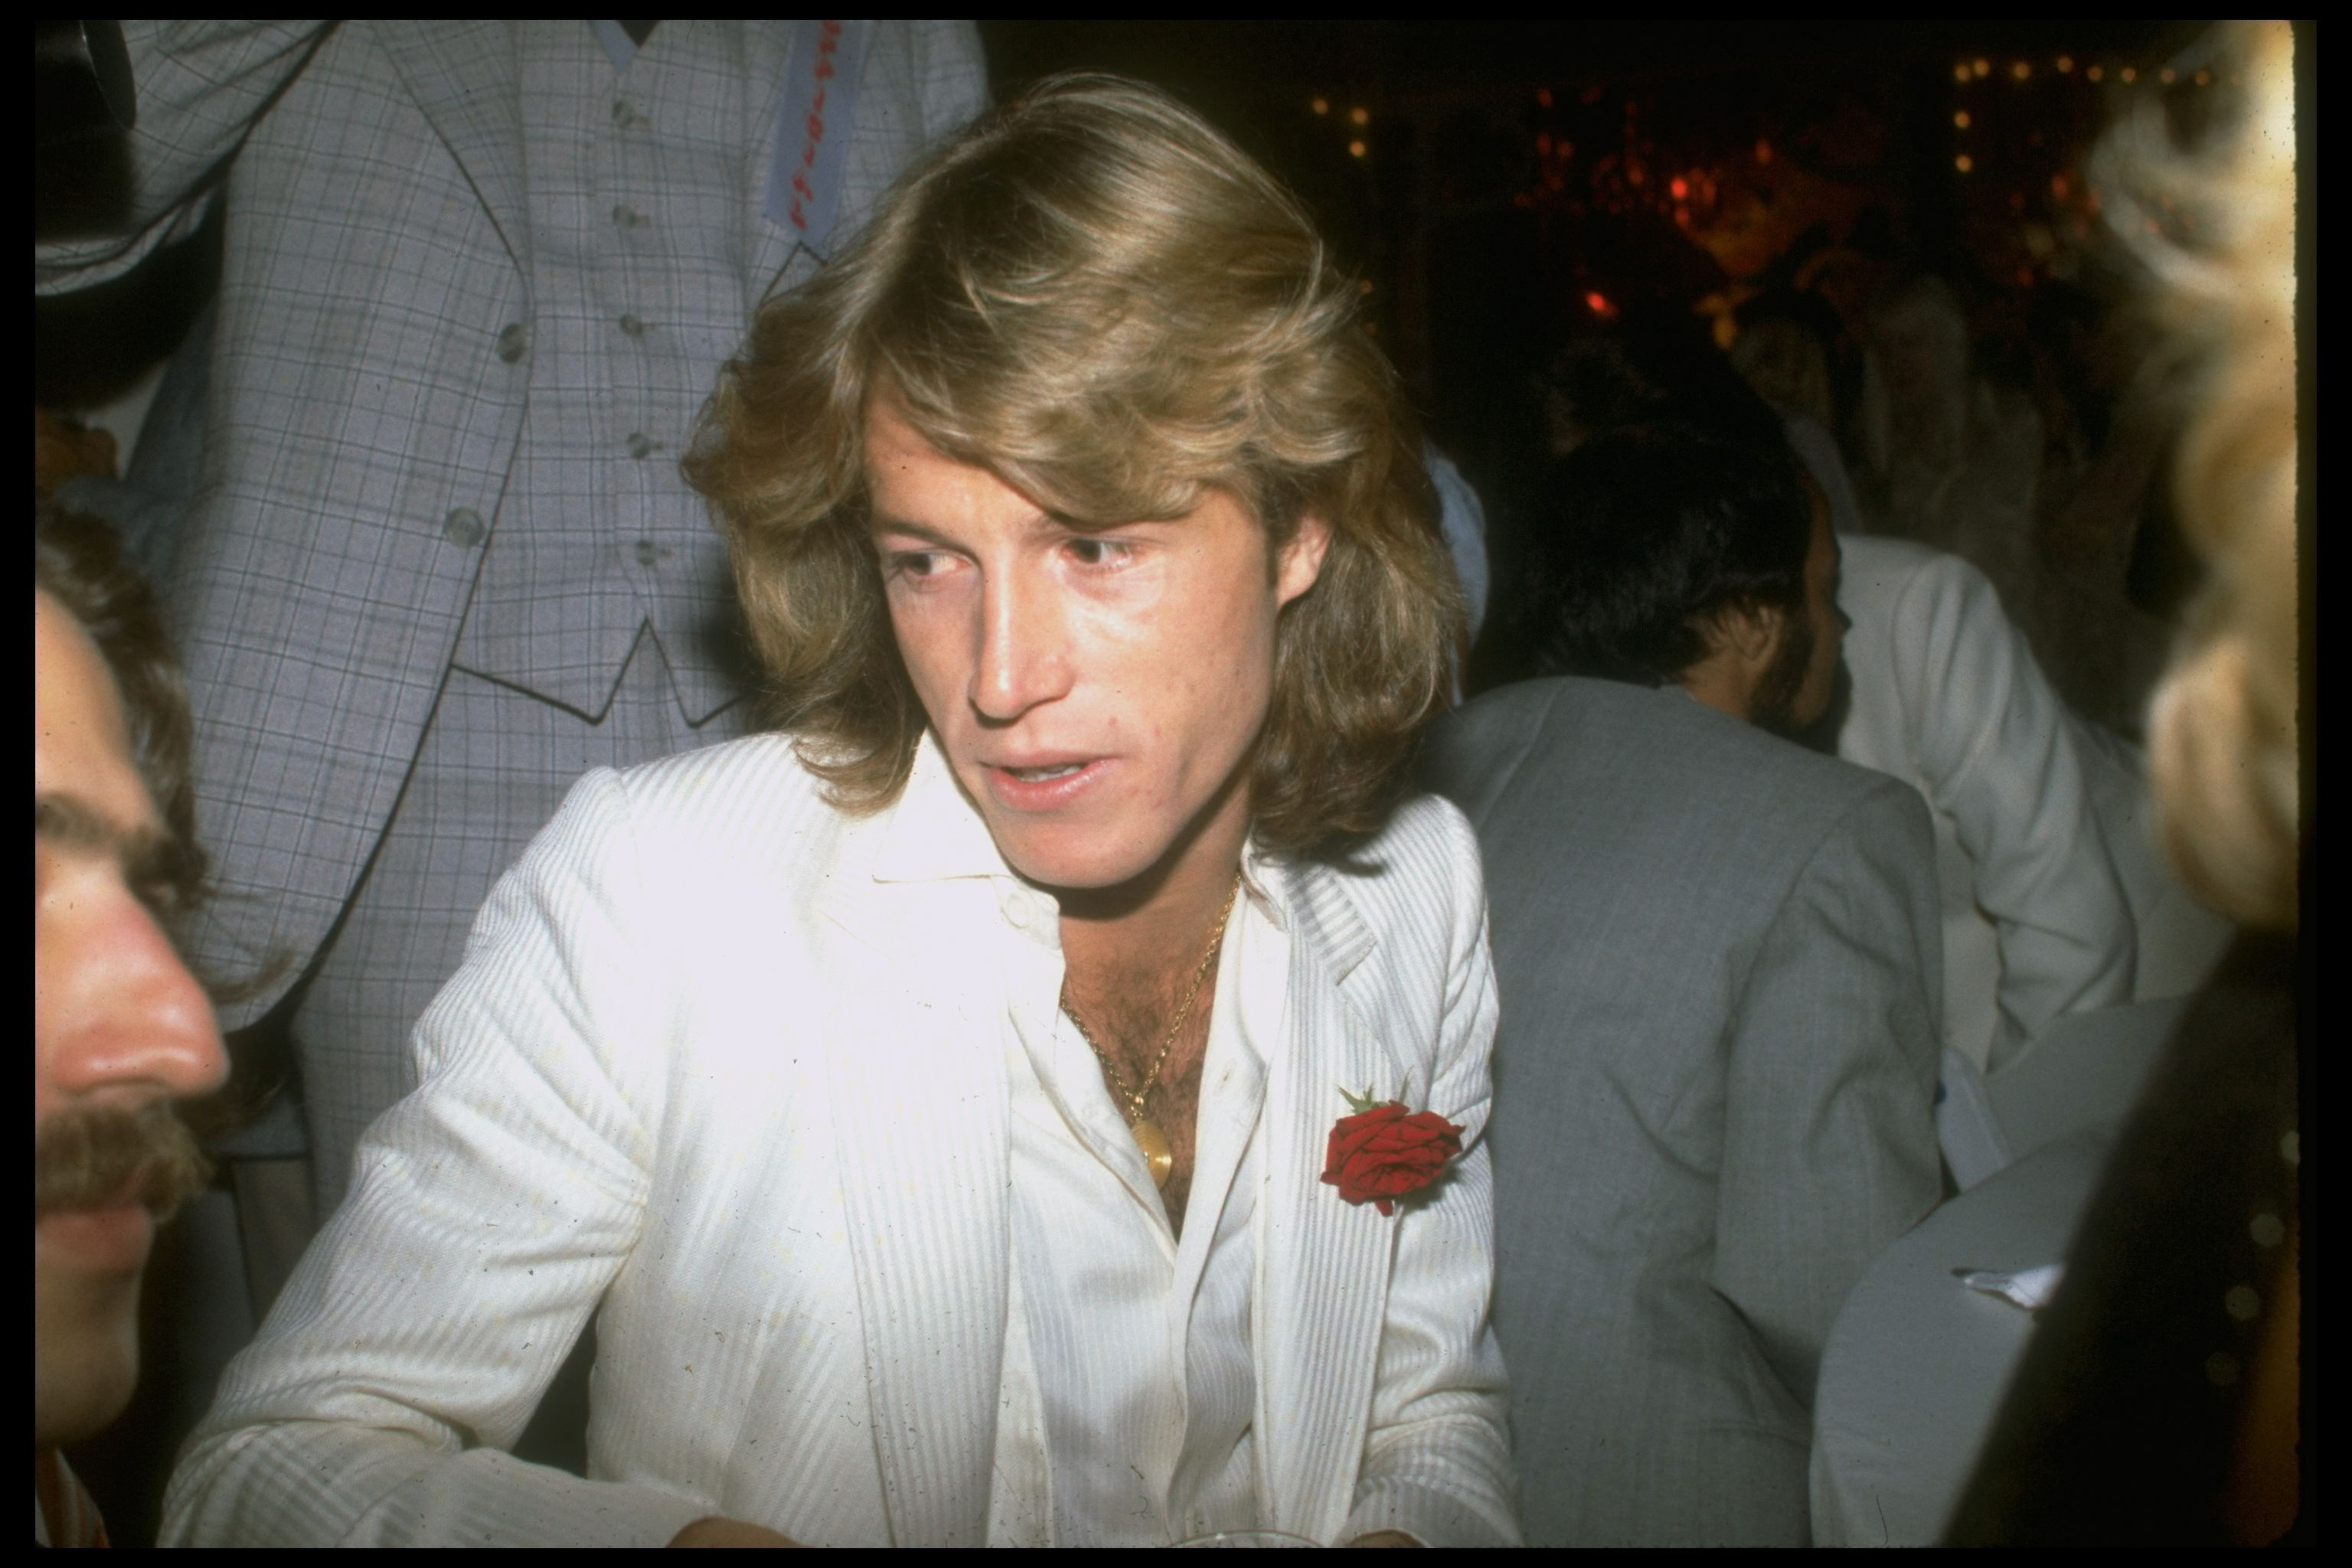 Andy Gibb photographed among other people, circa 1978 | Source: Getty Images